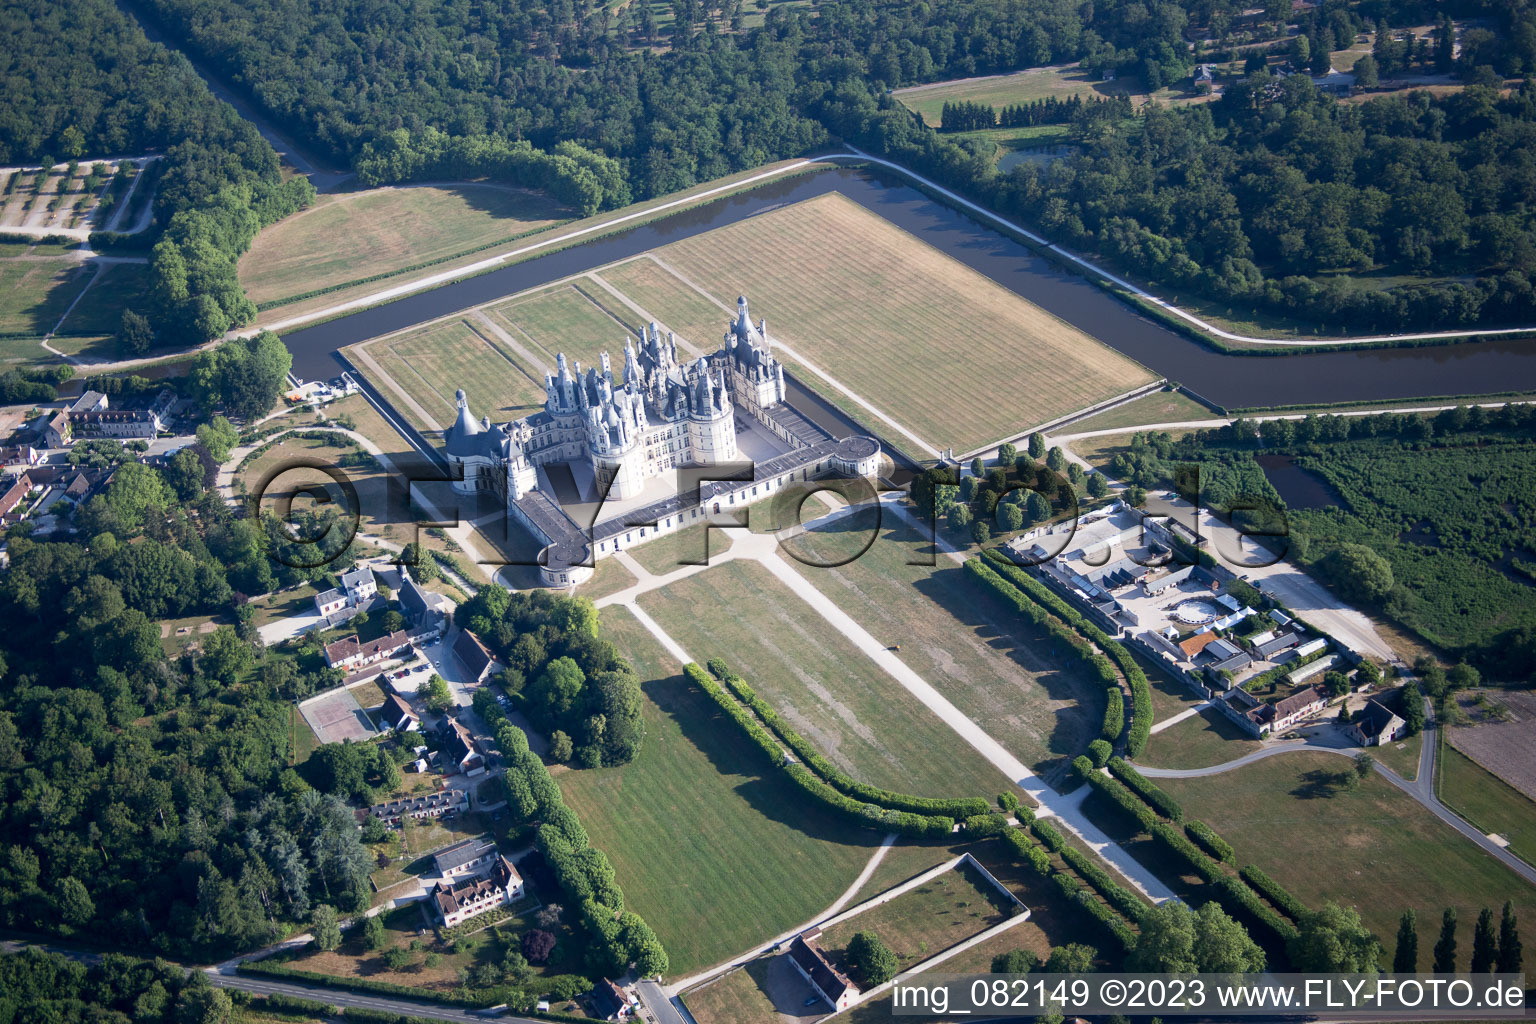 Chambord in the state Loir et Cher, France from above